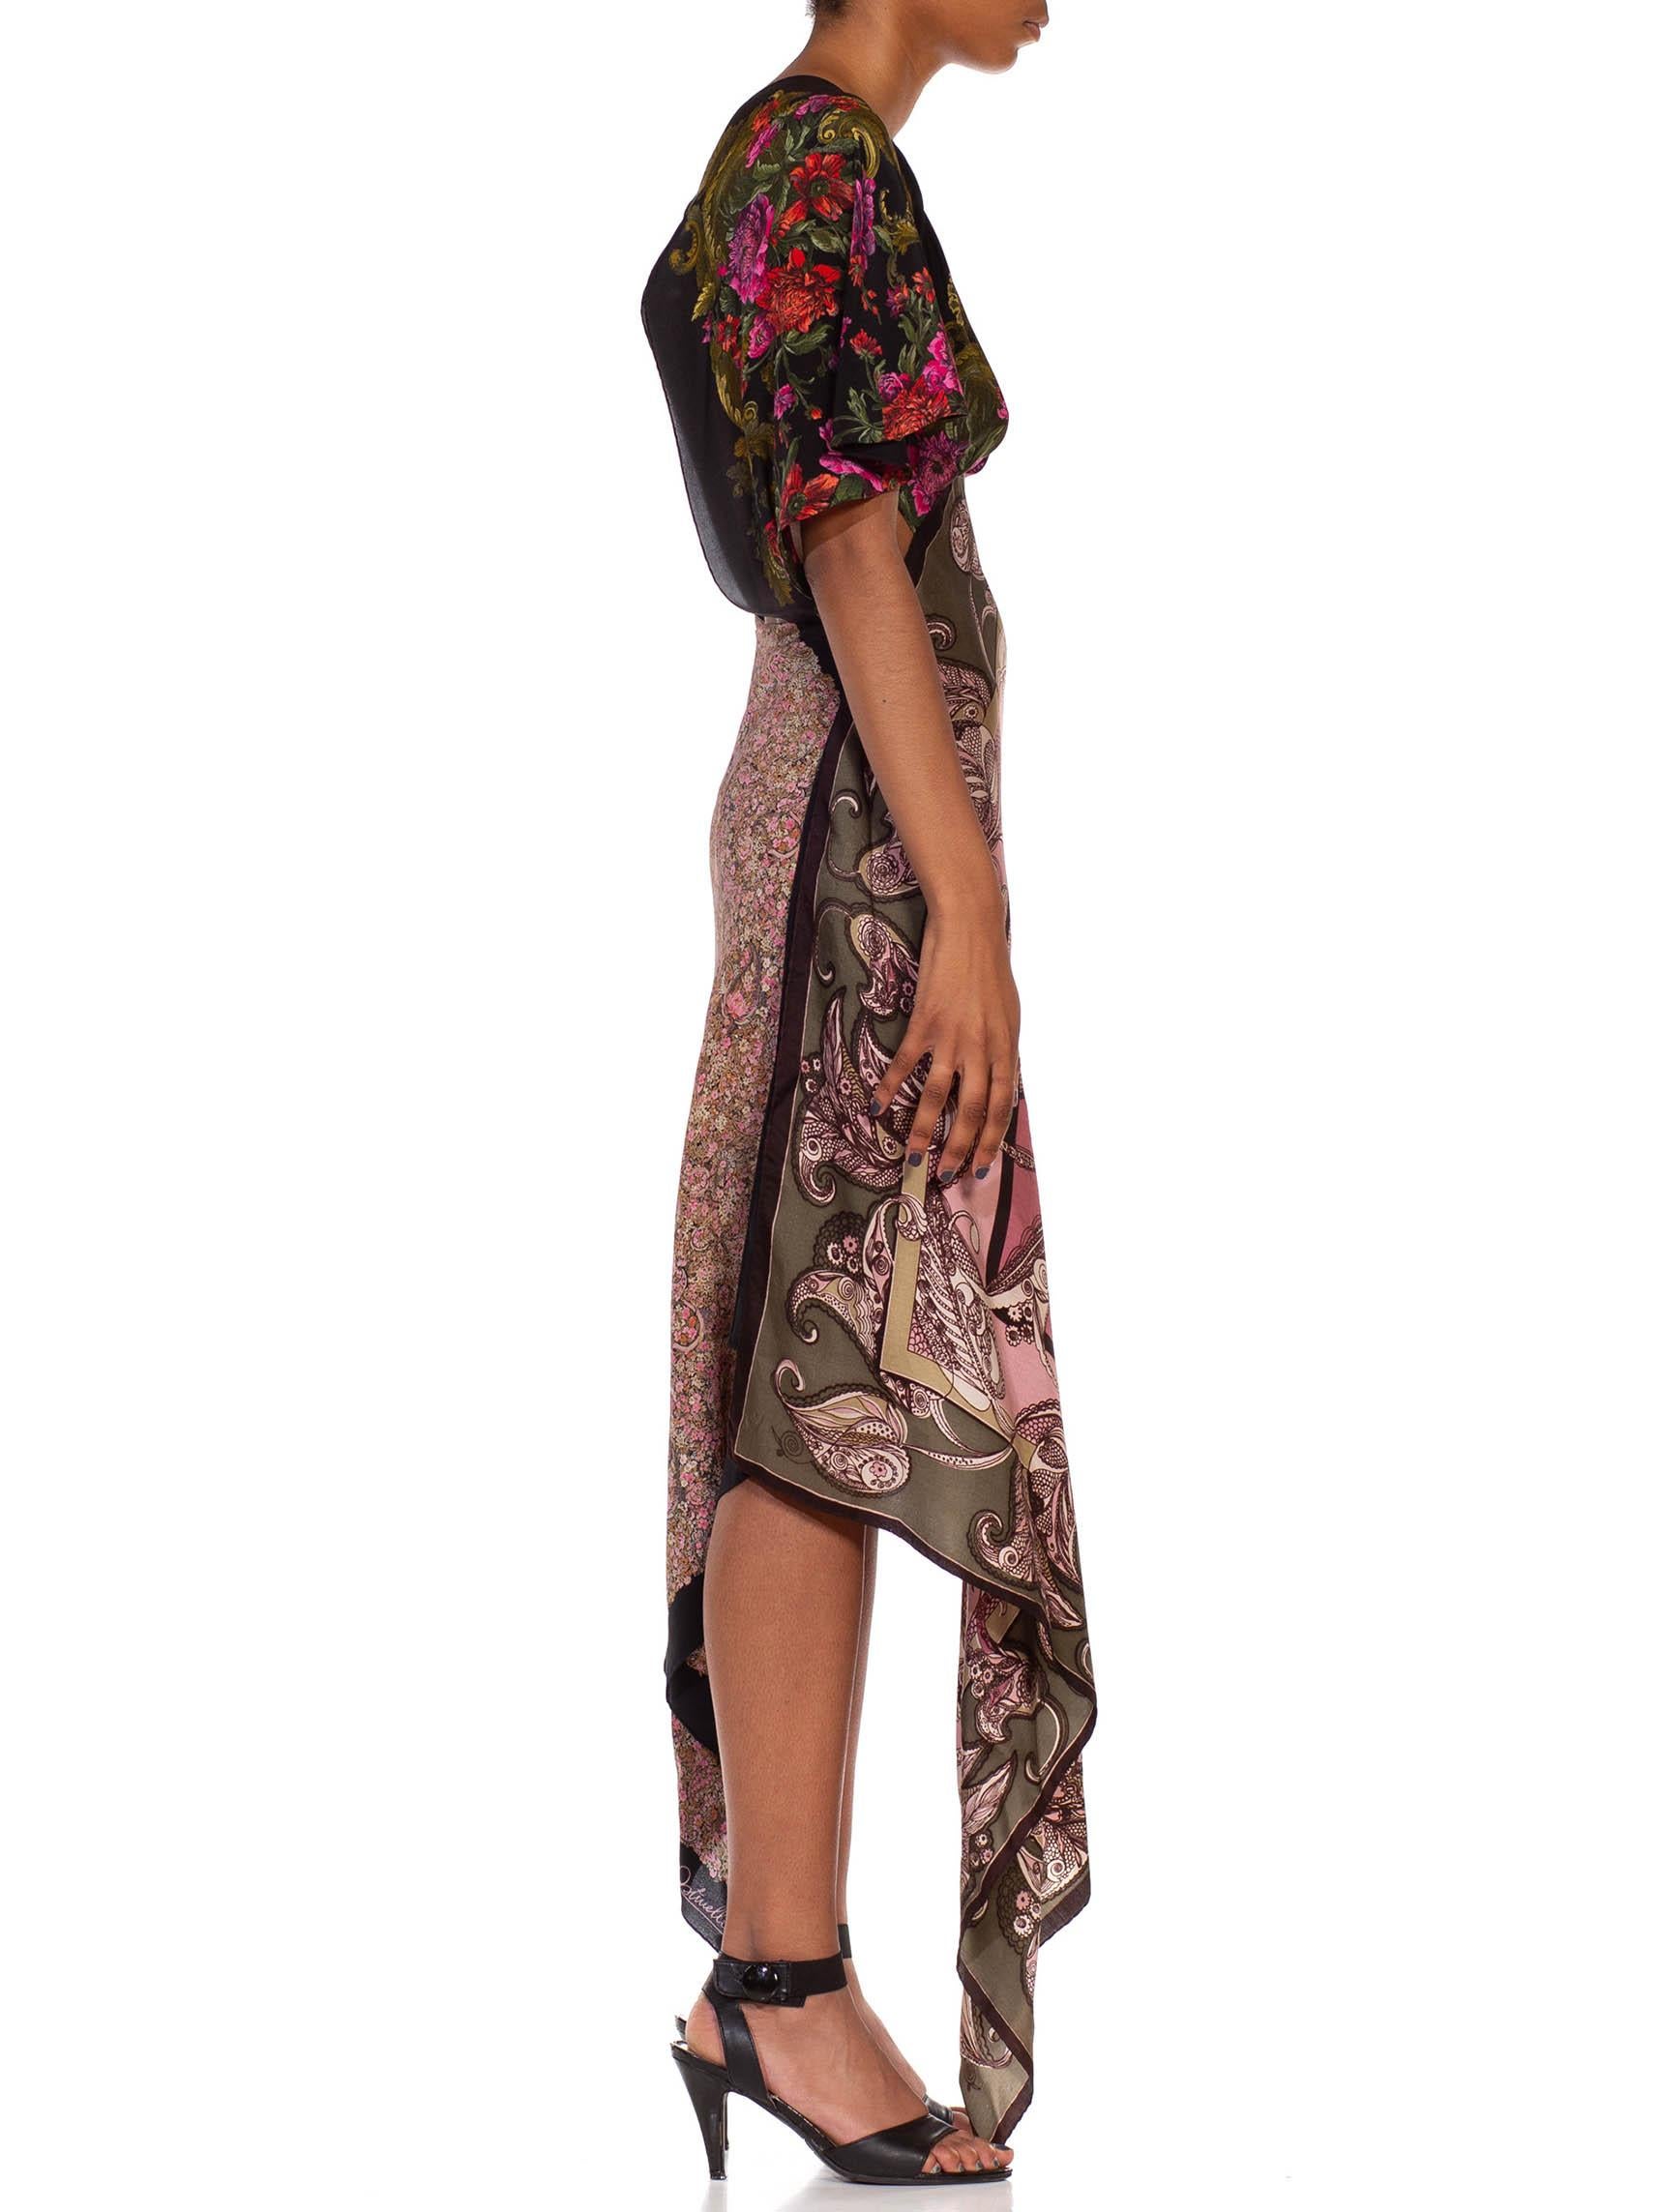 MORPHEW COLLECTION Black Pink & Grey Silk Twill Paisley Floral Print 3-Scarf Dress Made From Vintage Scarves
MORPHEW COLLECTION is made entirely by hand in our NYC Ateliér of rare antique materials sourced from around the globe. Our sustainable